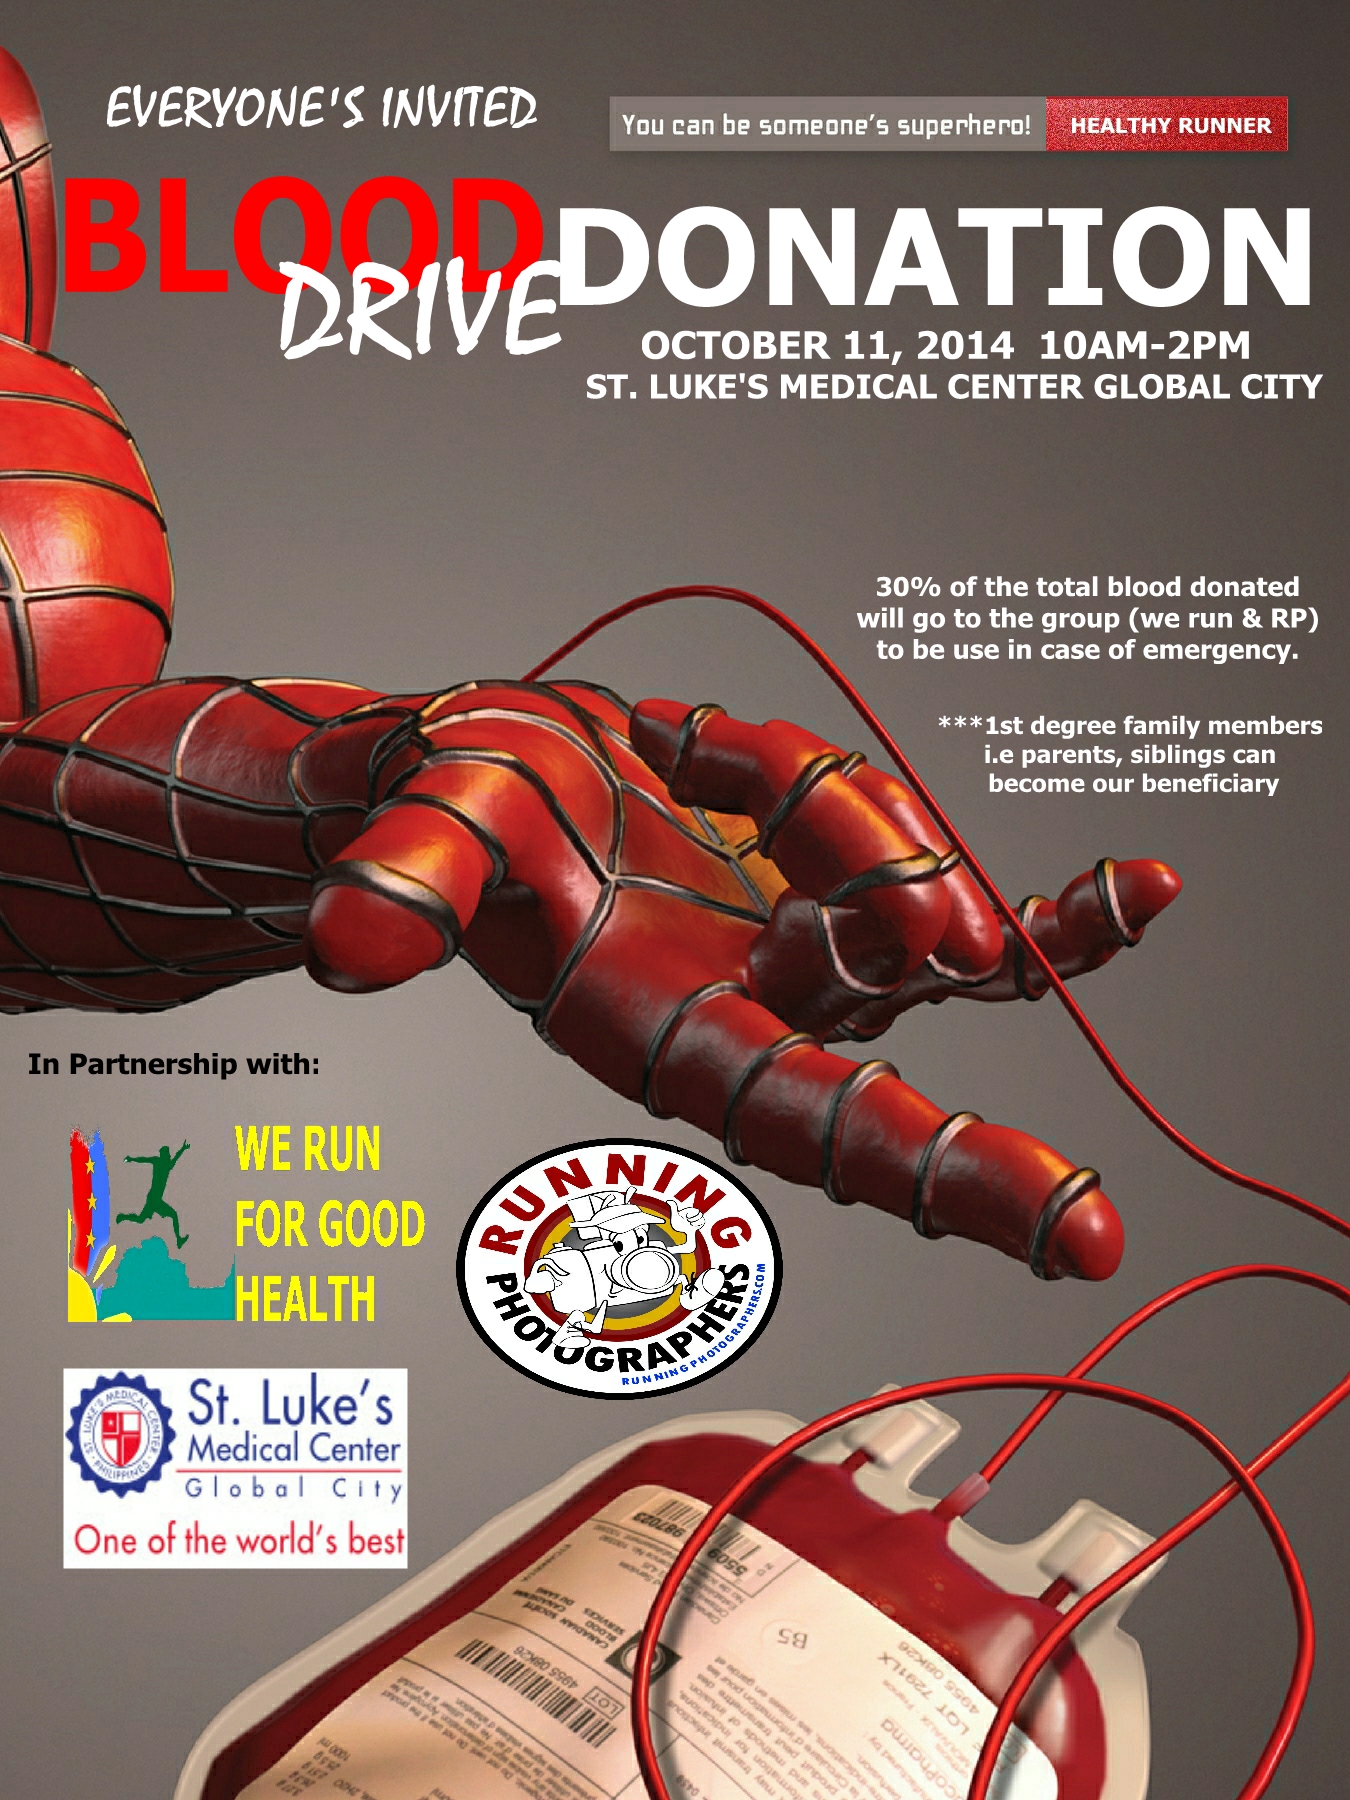  blood donation drive on October 11 2014 at St Lukes Medical